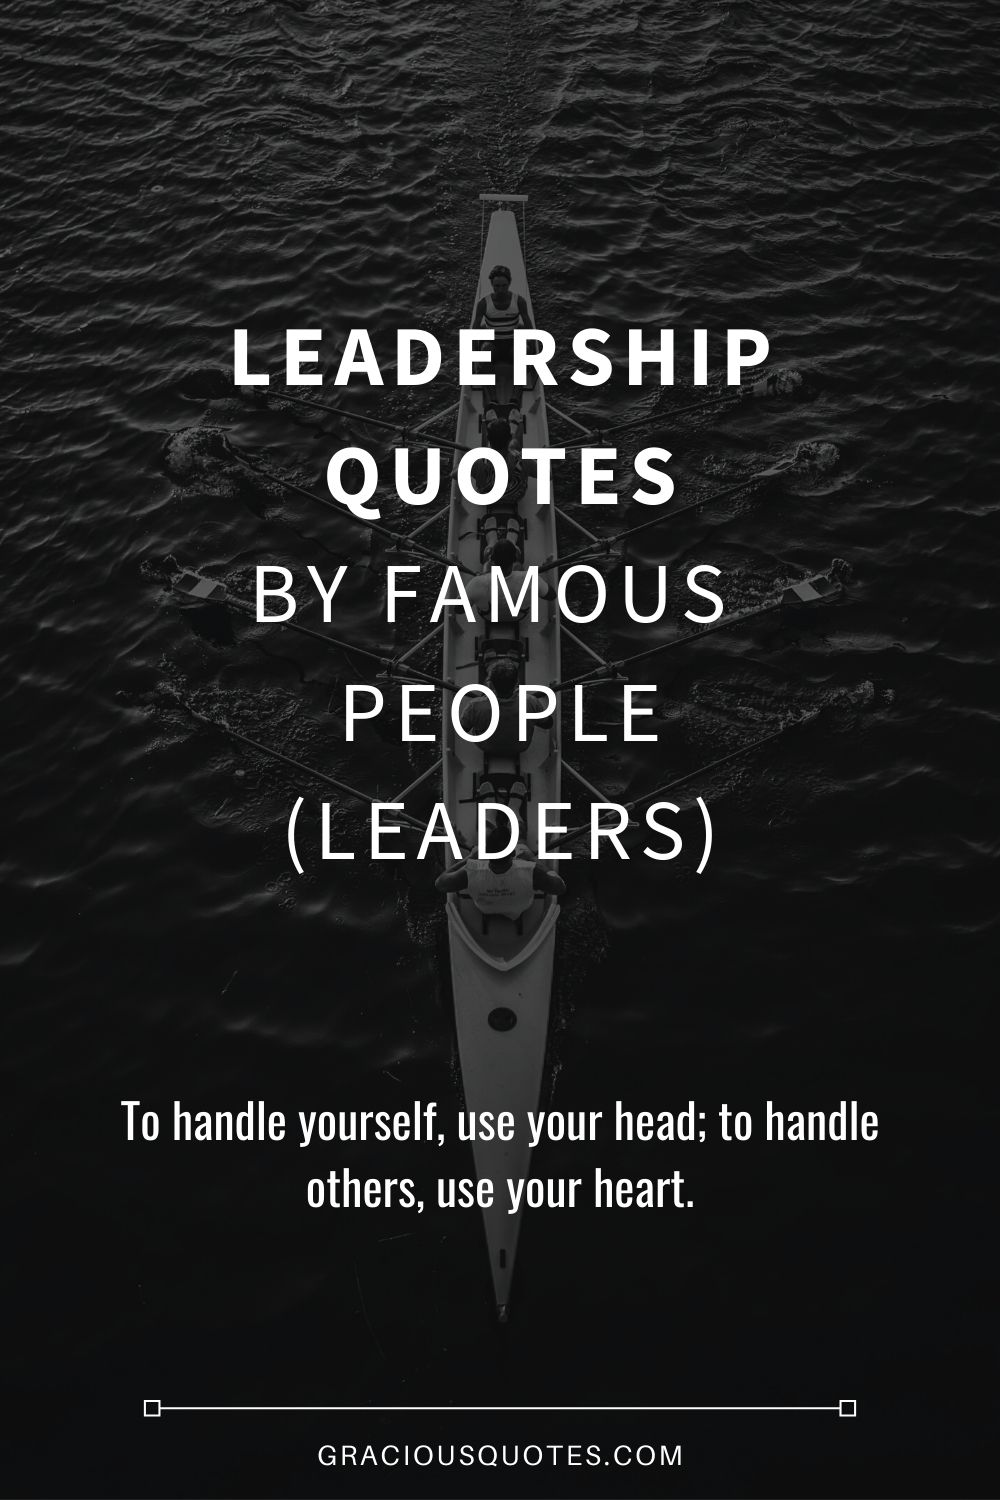 Leadership Quotes by Famous People (LEADERs) - Gracious Quotes